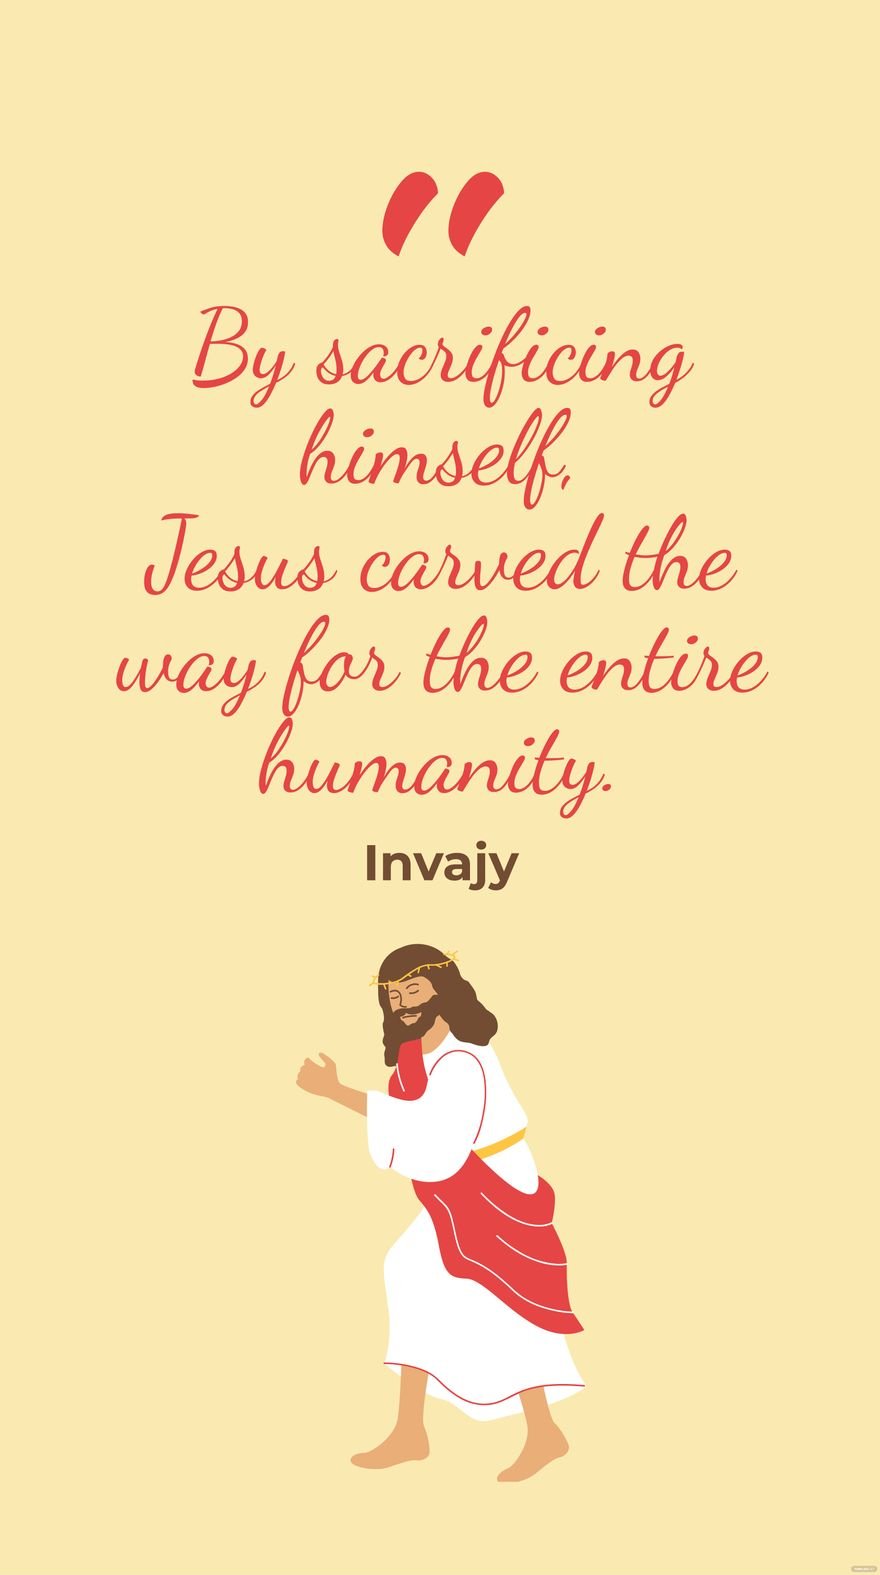 Invajy - By sacrificing himself, Jesus carved the way for the entire humanity.